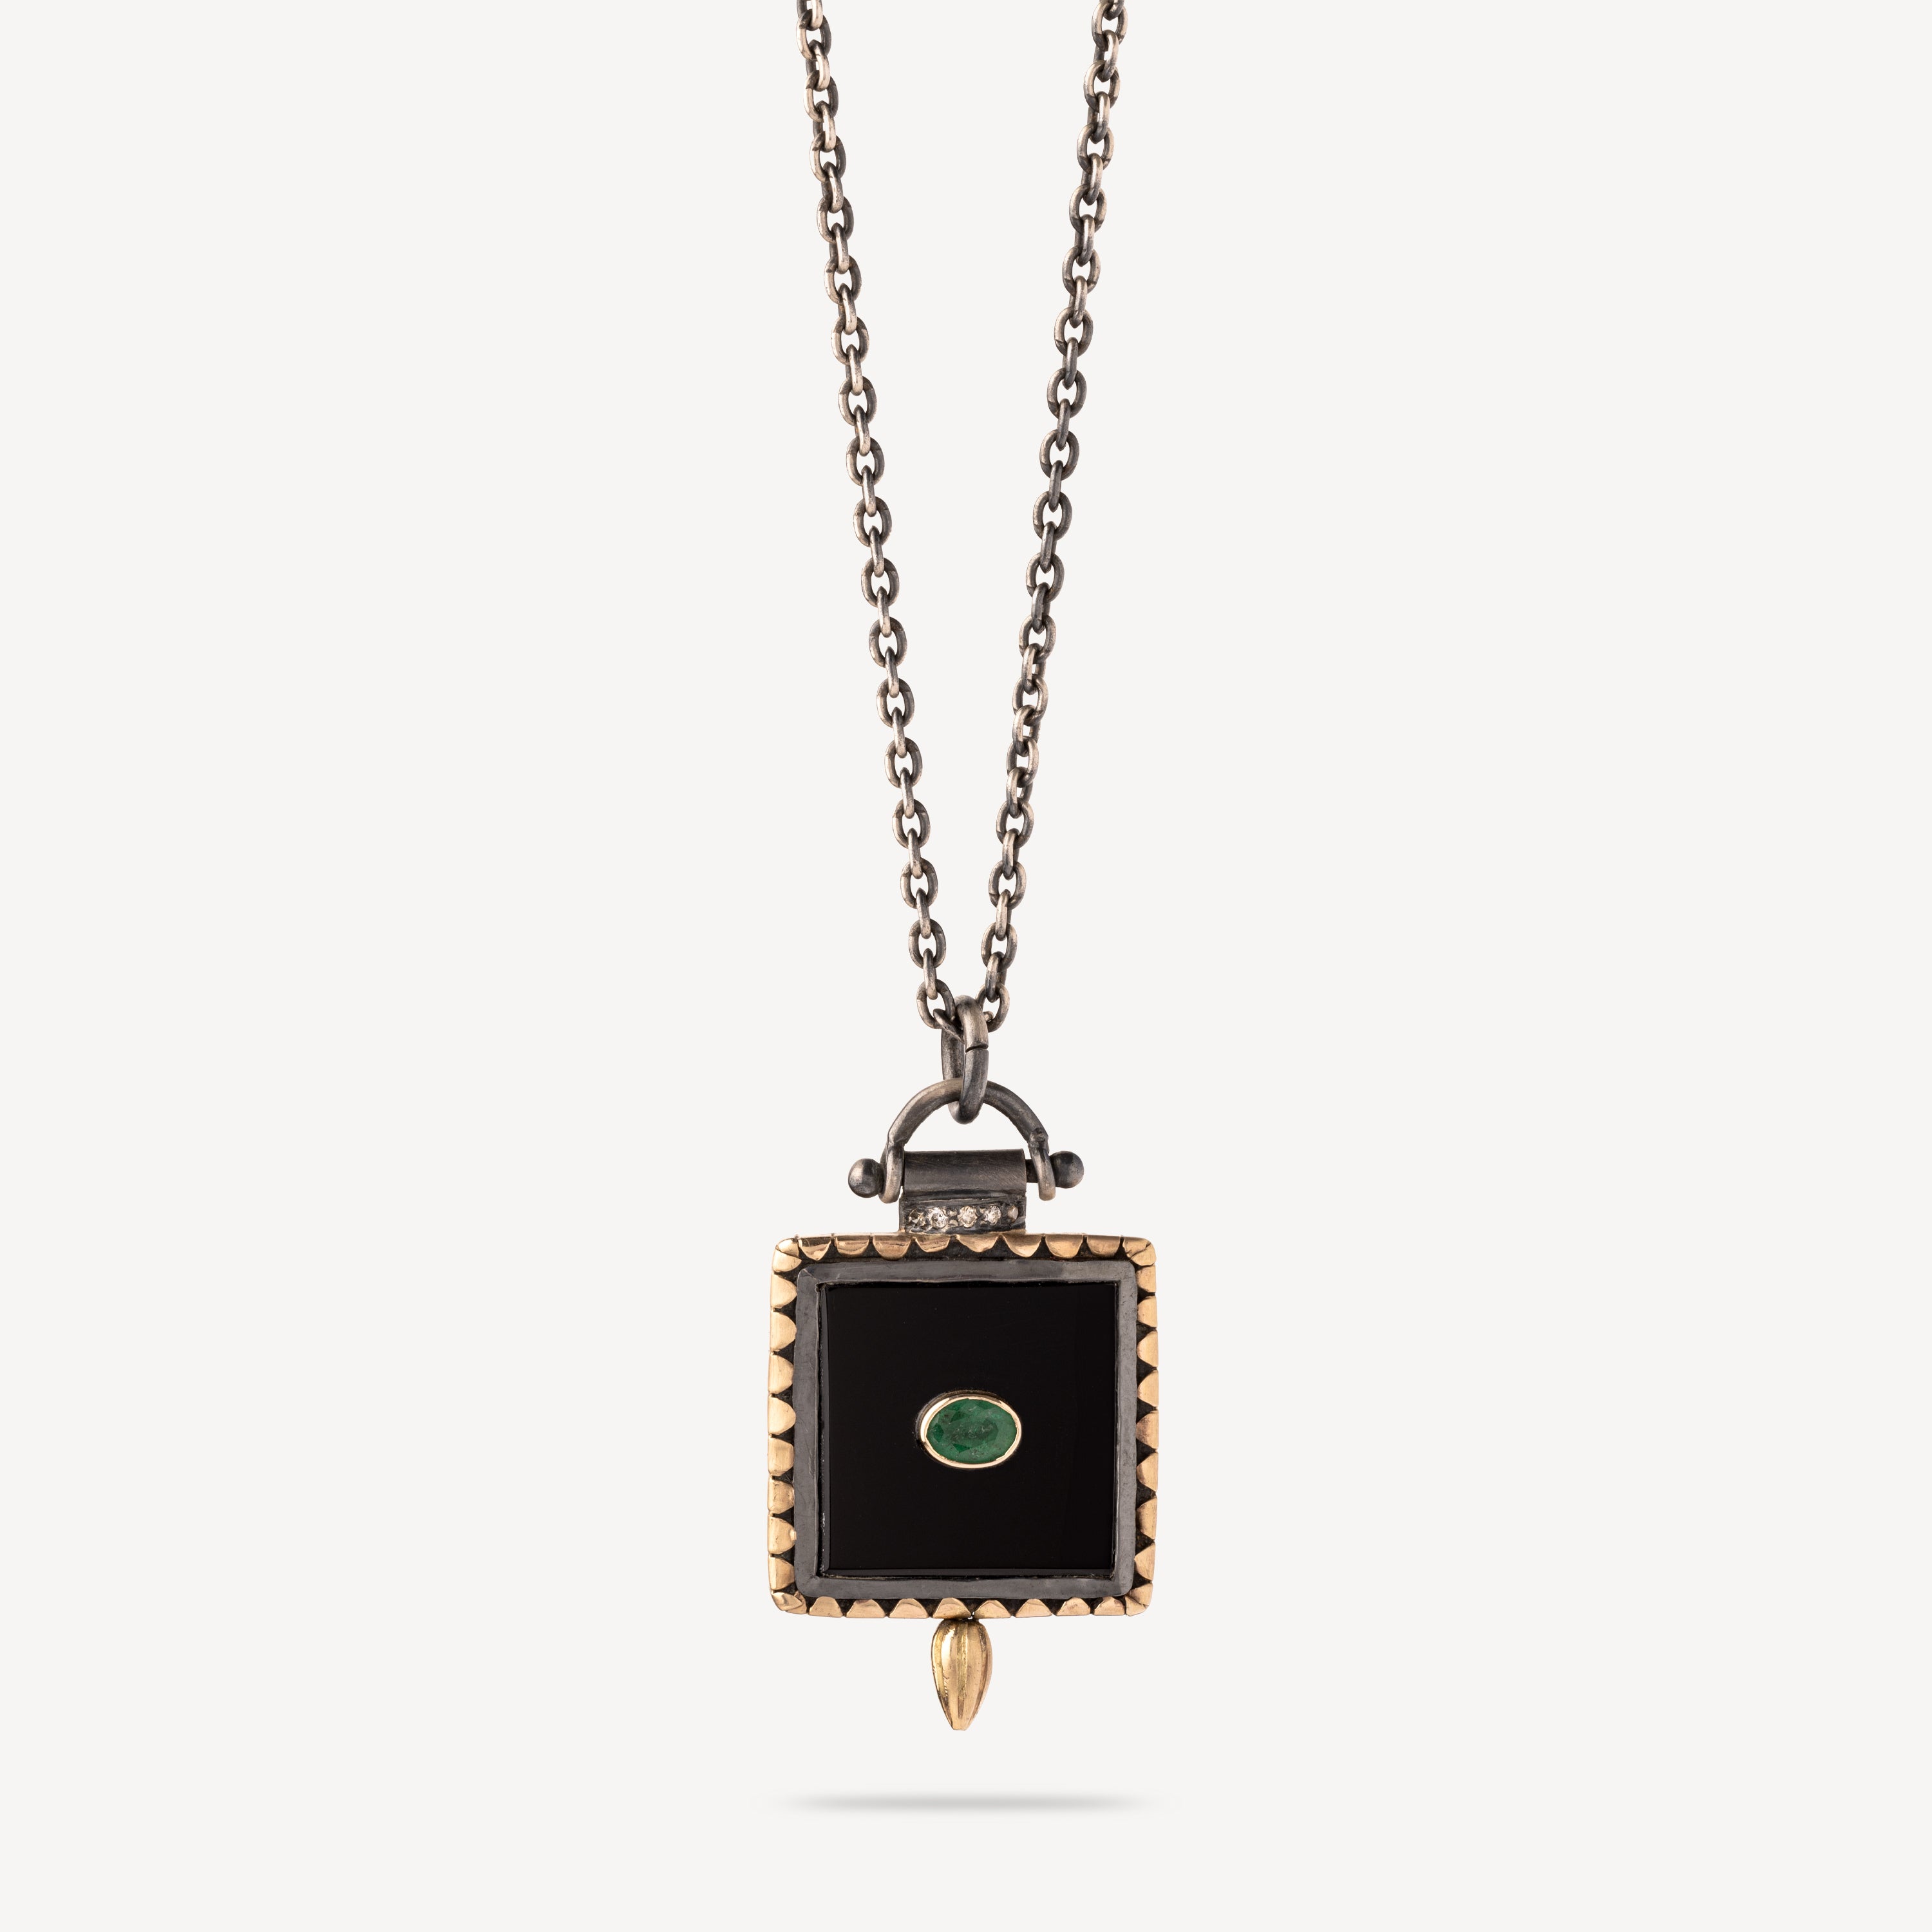 Onyx and emerald cuadro necklace